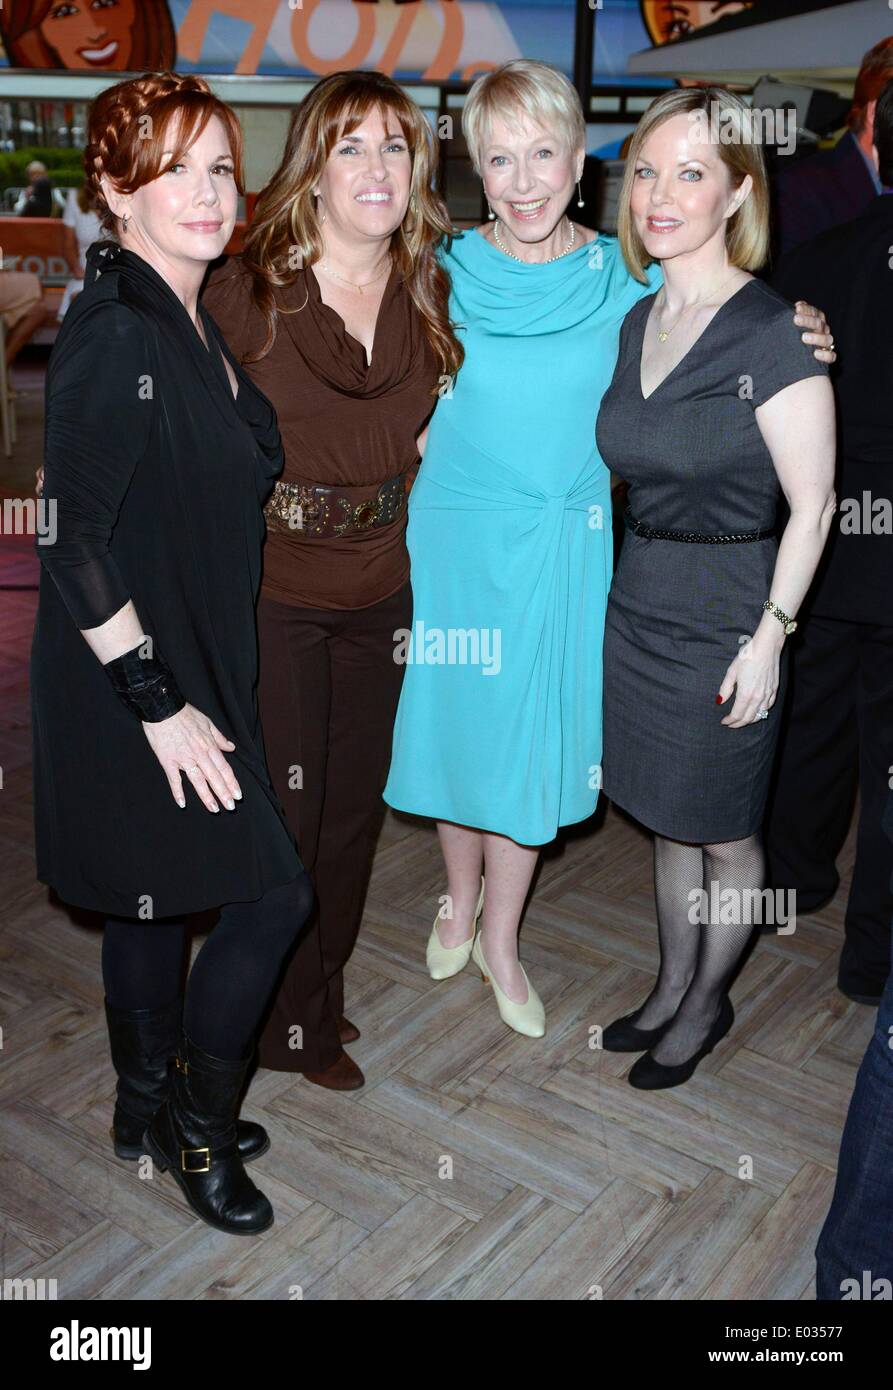 New York, NY, USA. 30th Apr, 2014. Melissa Gilbert, Lindsay Rachel Greenbush, Karen Grassle, Melissa Sue Anderson at talk show appearance for LITTLE HOUSE ON THE PRAIRIE Cast Reunion at the NBC Today Show, Rockefeller Plaza, New York, NY April 30, 2014. Credit:  Derek Storm/Everett Collection/Alamy Live News Stock Photo